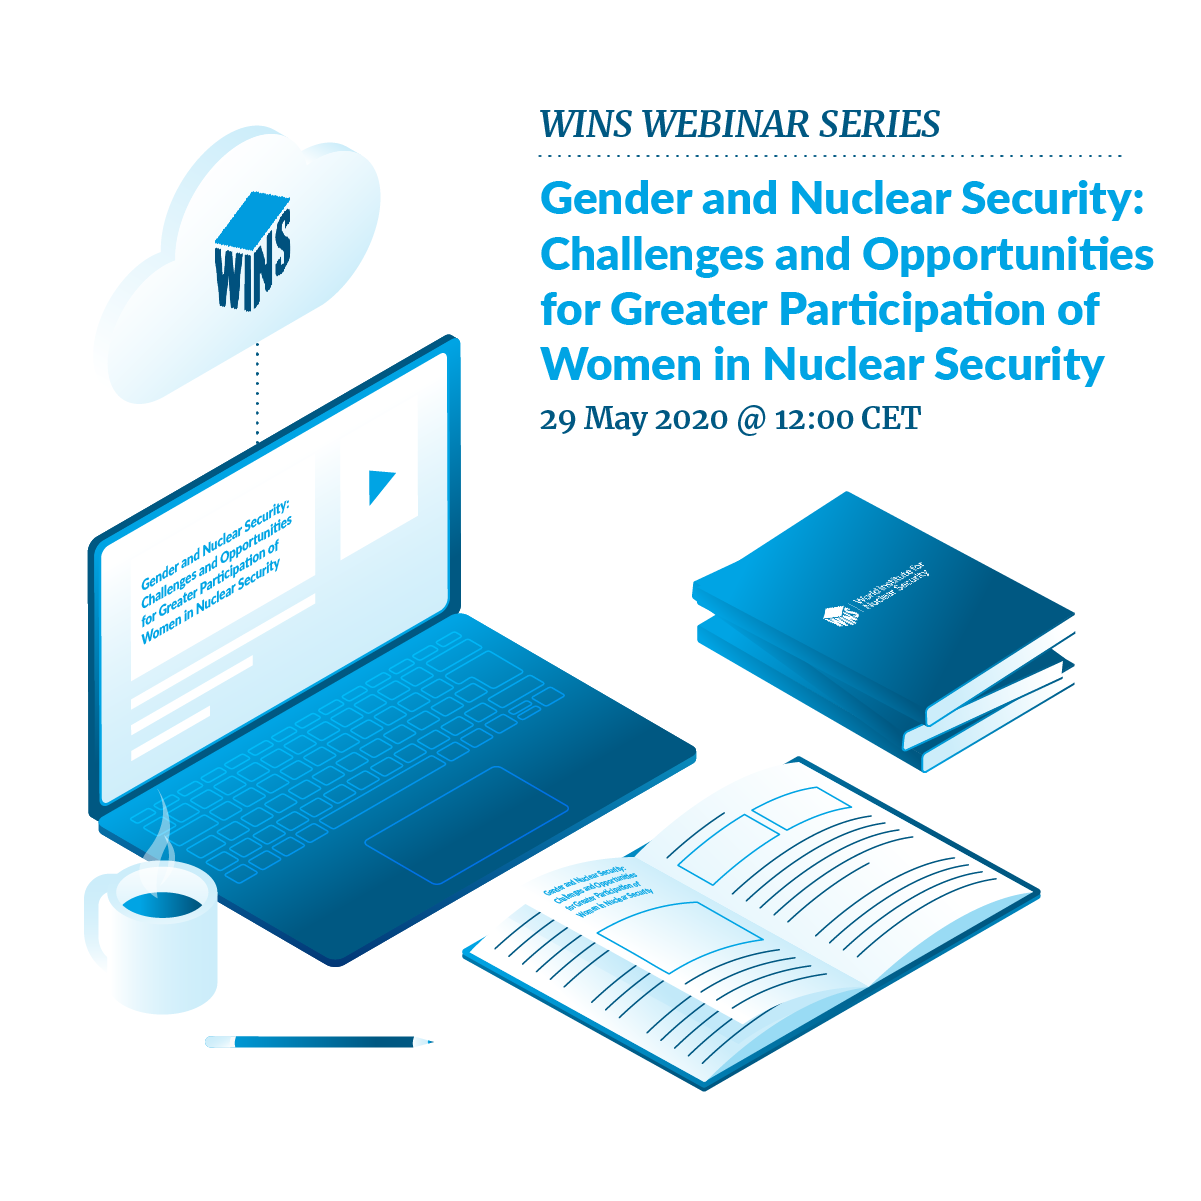 Workshop on autonomous and remotely operated systems: Benefits and challenges to nuclear security